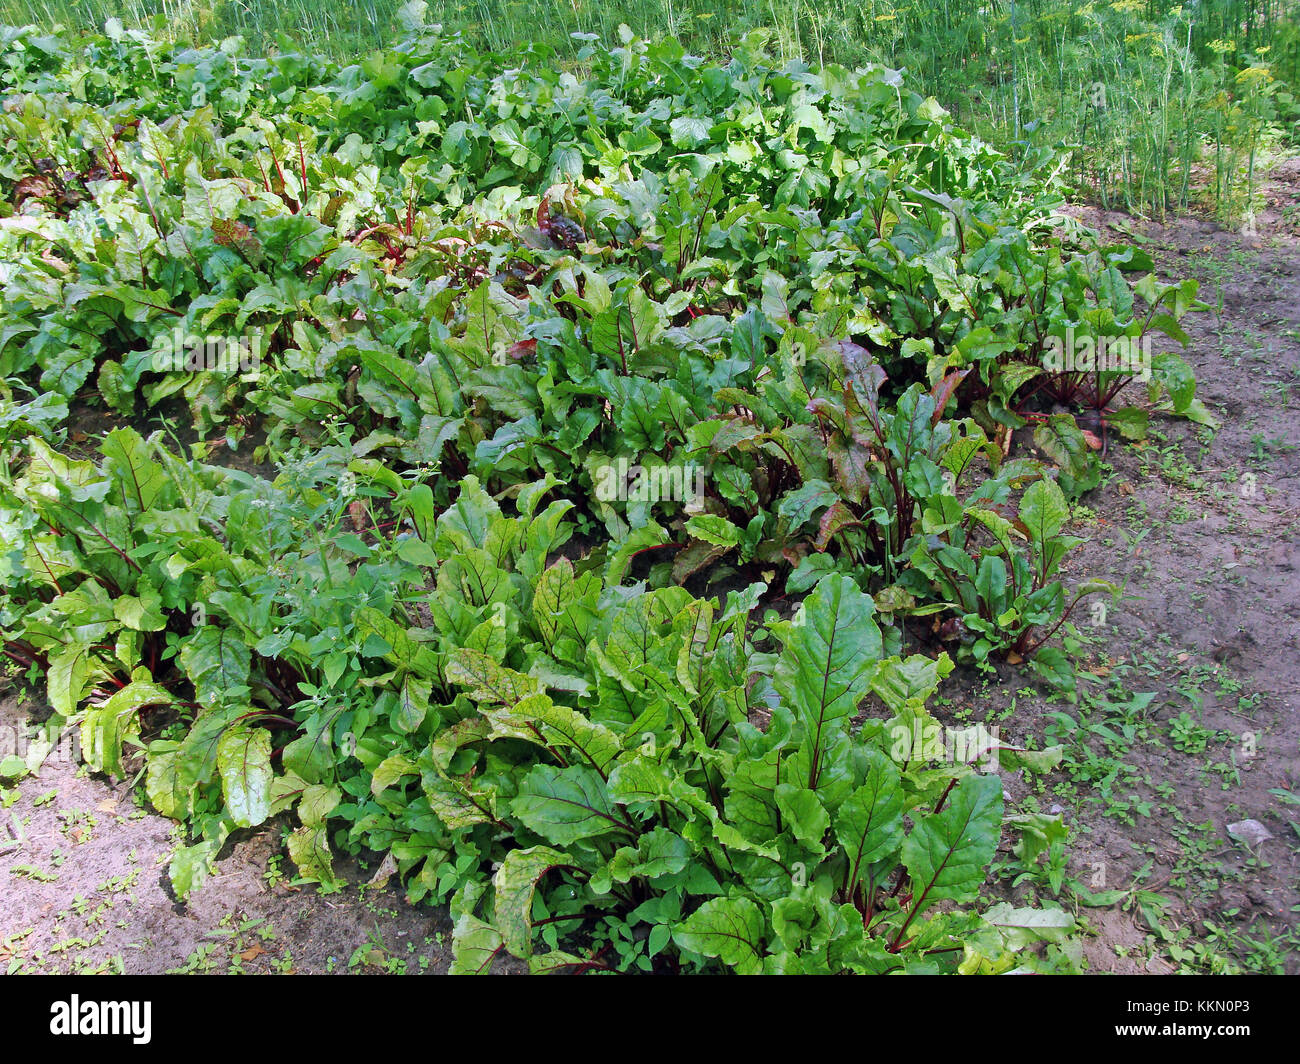 Furrows of red beets growing in vegetable garden concept of organic biological farming Stock Photo